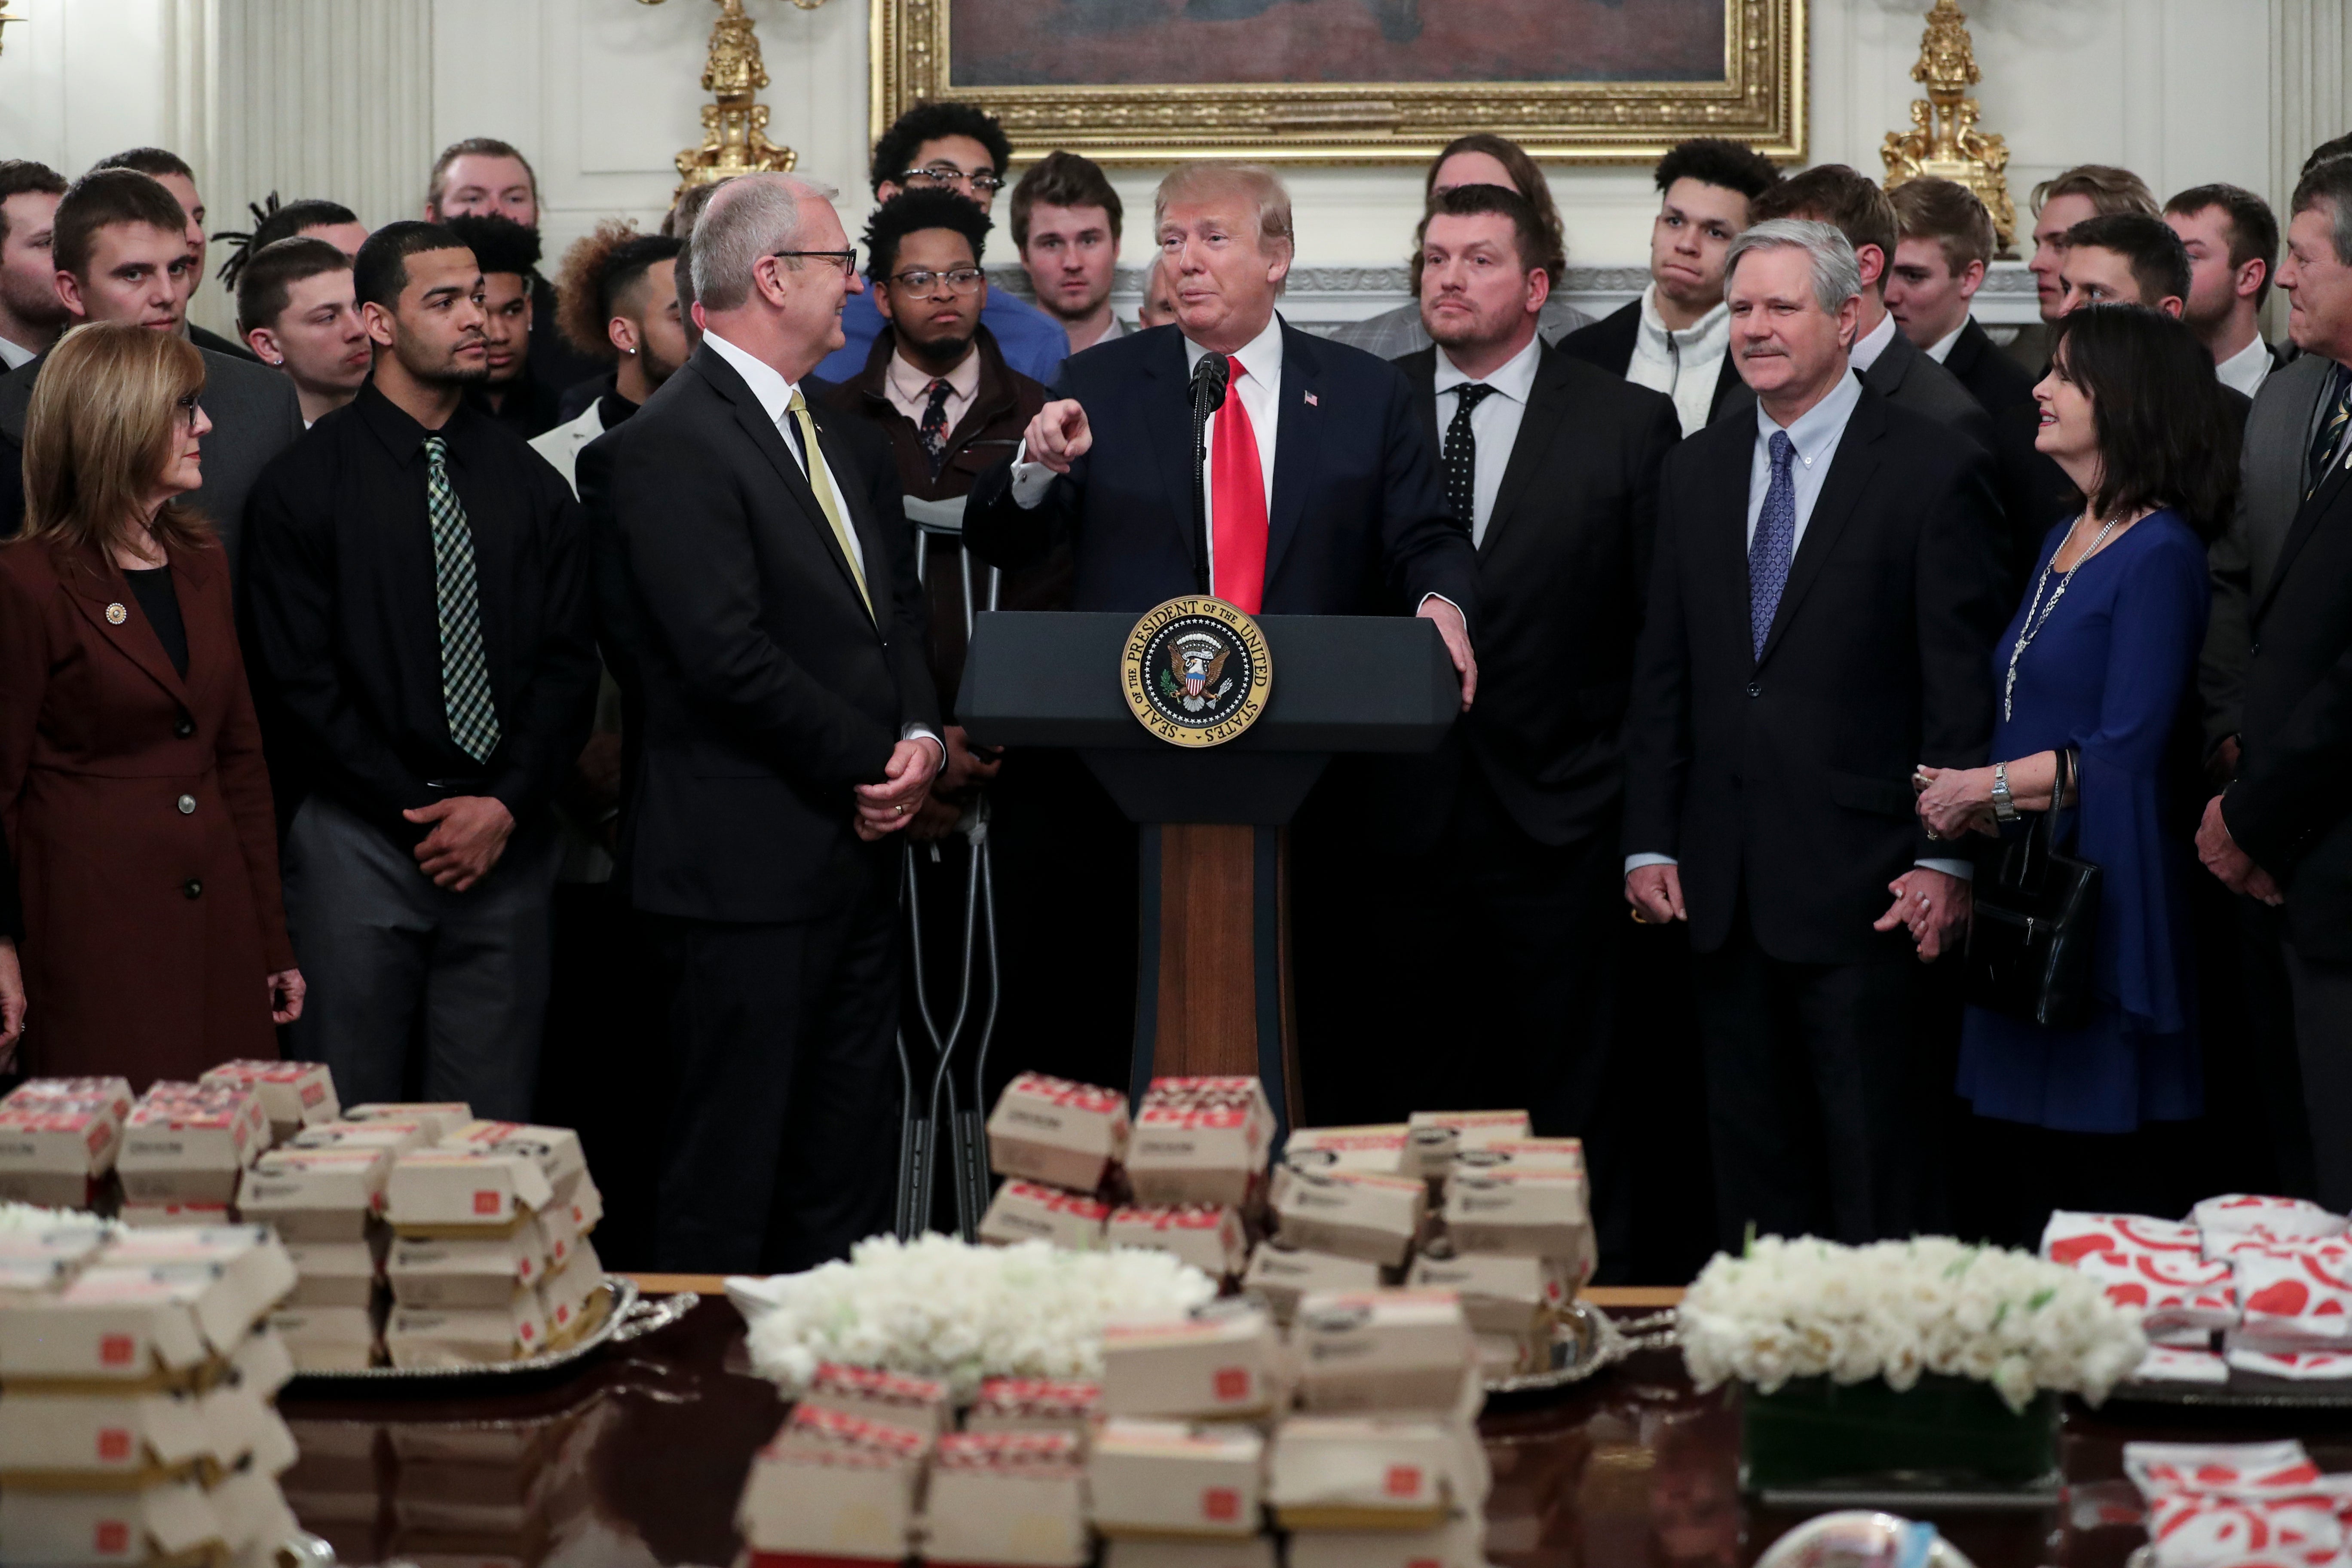 President Donald Trump speaks behind a table full of McDonald's hamburgers, Chick fil-a sandwiches and other fast food as he welcomes the 2018 Football Division I FCS champs North Dakota State Bison in the Diplomatic Room of the White House on March 4, 2019 in Washington, DC